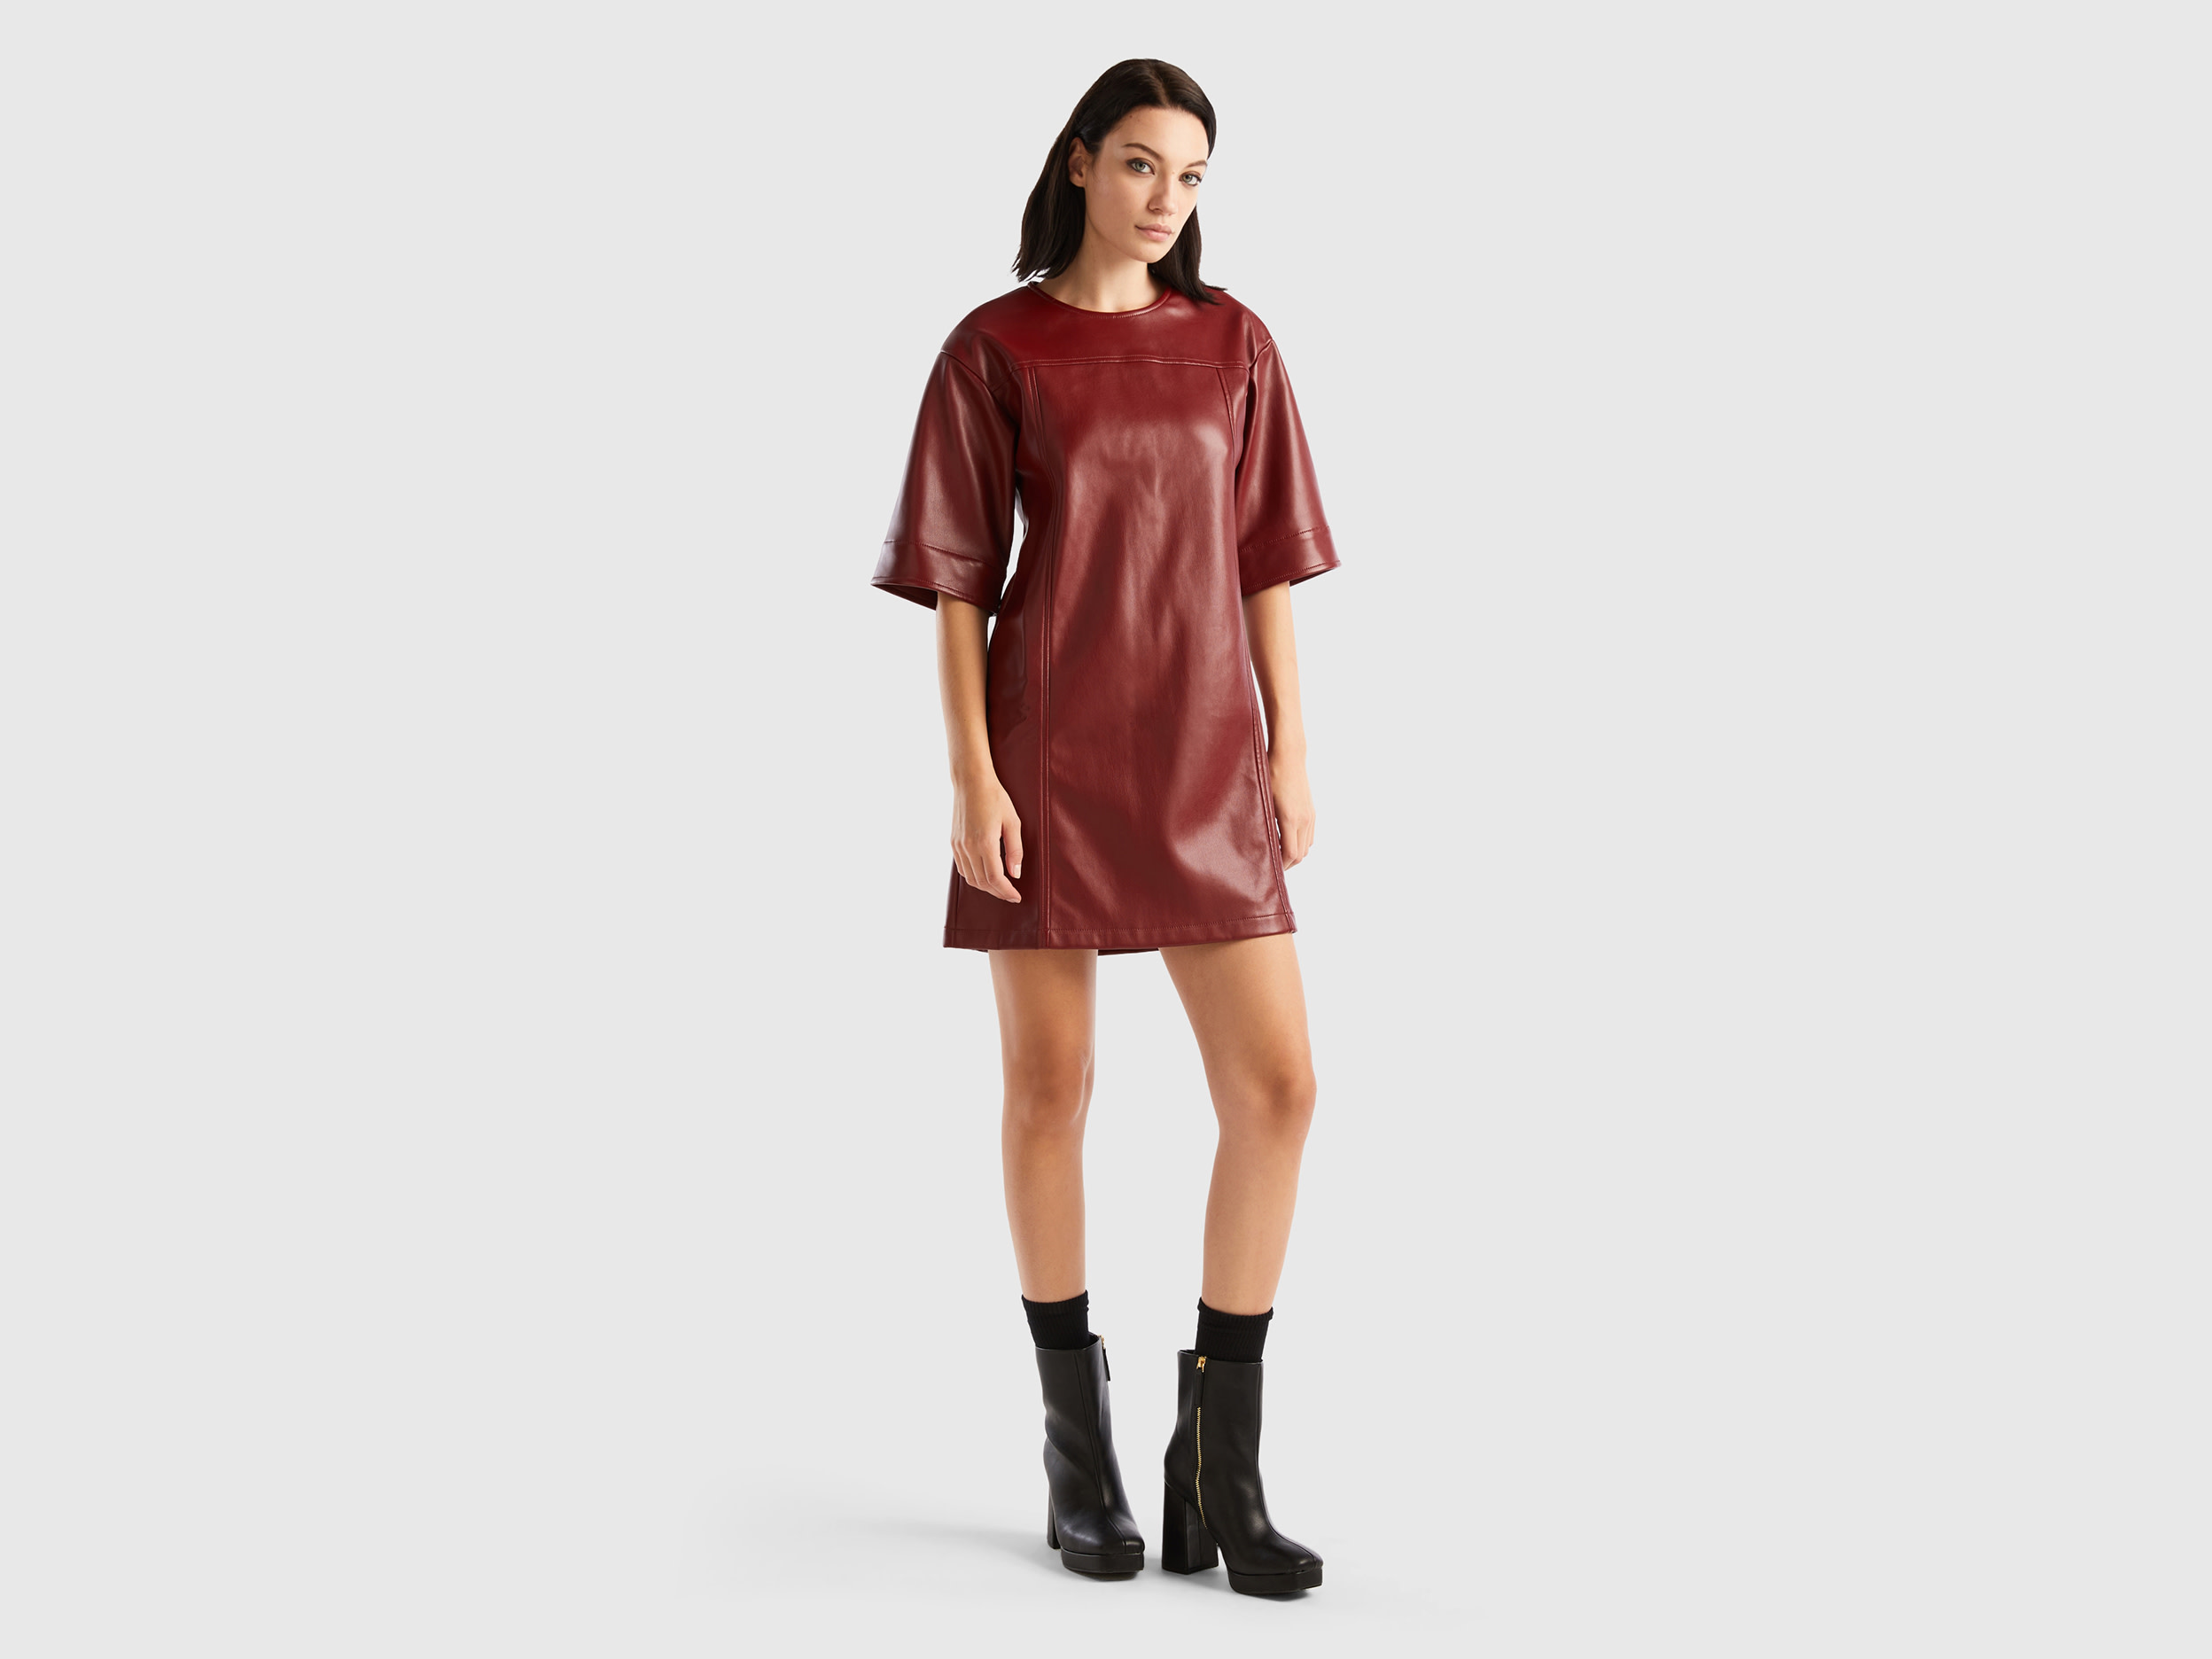 Benetton, Cropped Dress In Imitation Leather Fabric, size XS, Burgundy, Women